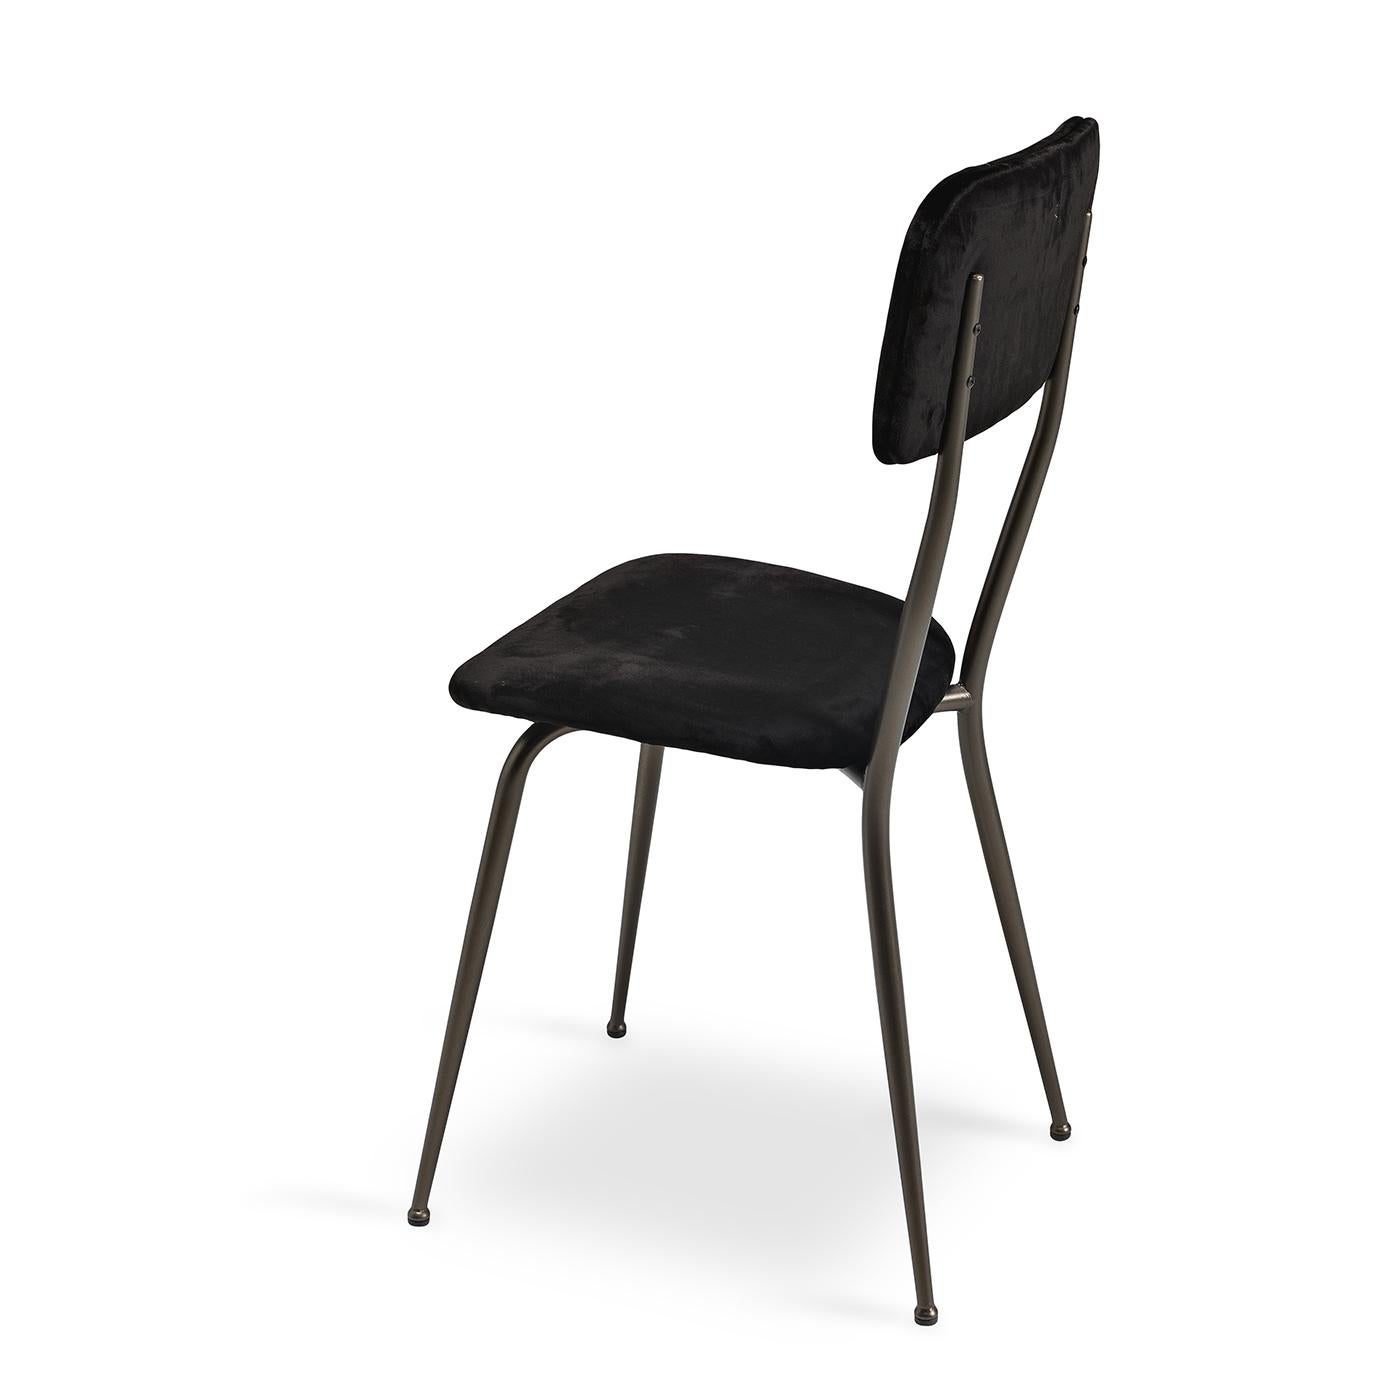 Dark tones and sleek lines define this elegant chair, updating a classic silhouette with a glamorous twist. Boasting a clean metal frame with a brushed bronze finish, this piece is defined by luxurious black velvet upholstery. Offering a padded seat